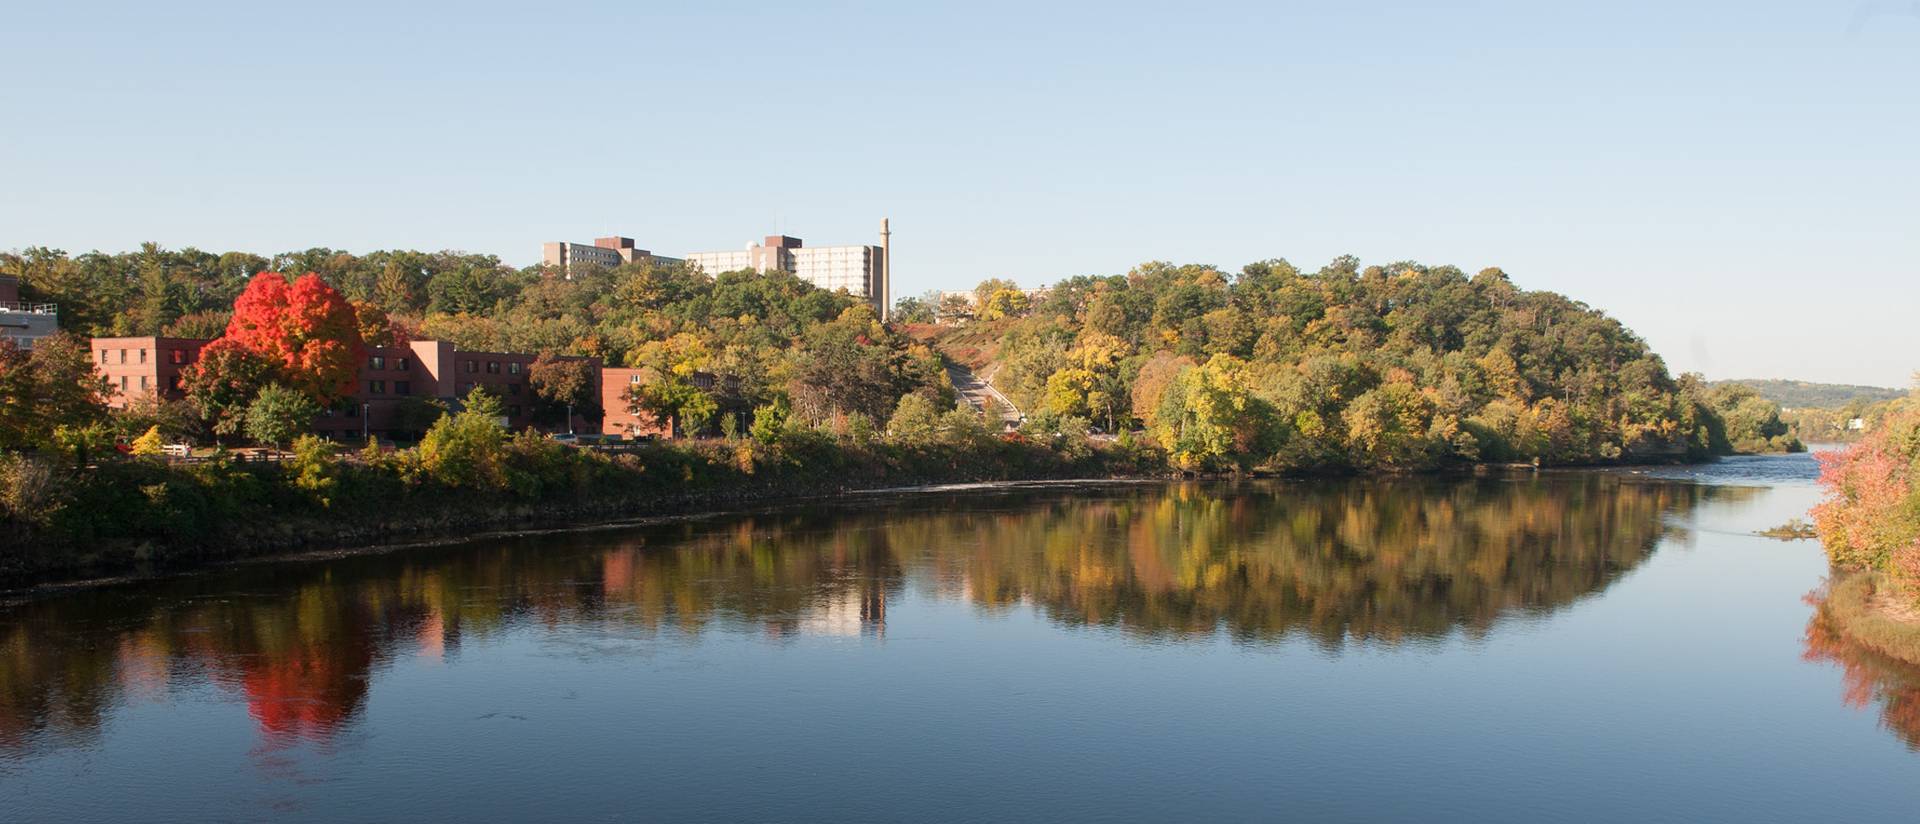 UW-Eau Claire campus and Chippewa River